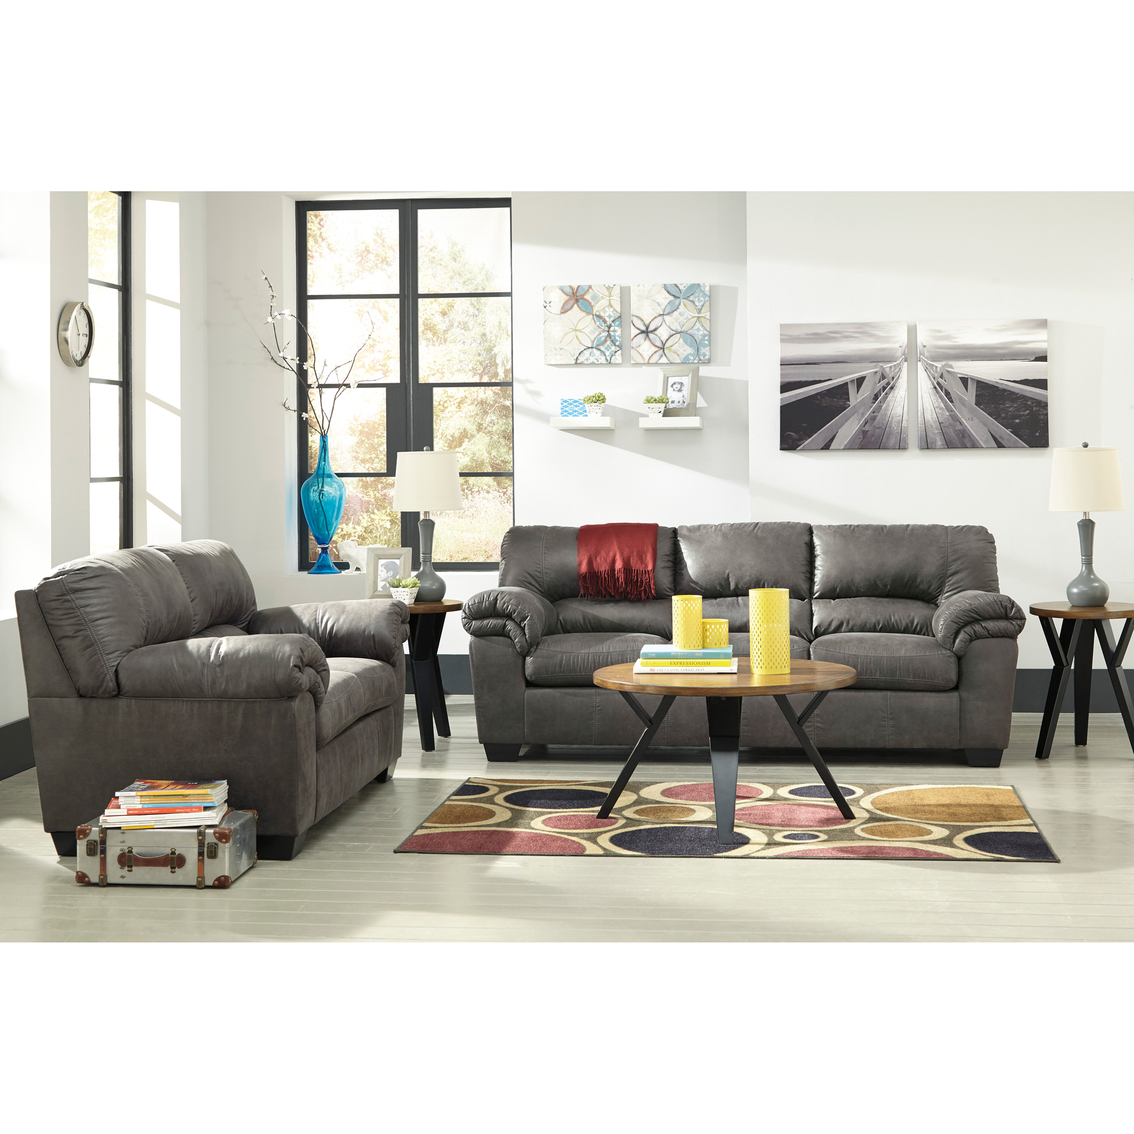 Signature Design by Ashley Bladen Sofa and Loveseat - Image 2 of 2